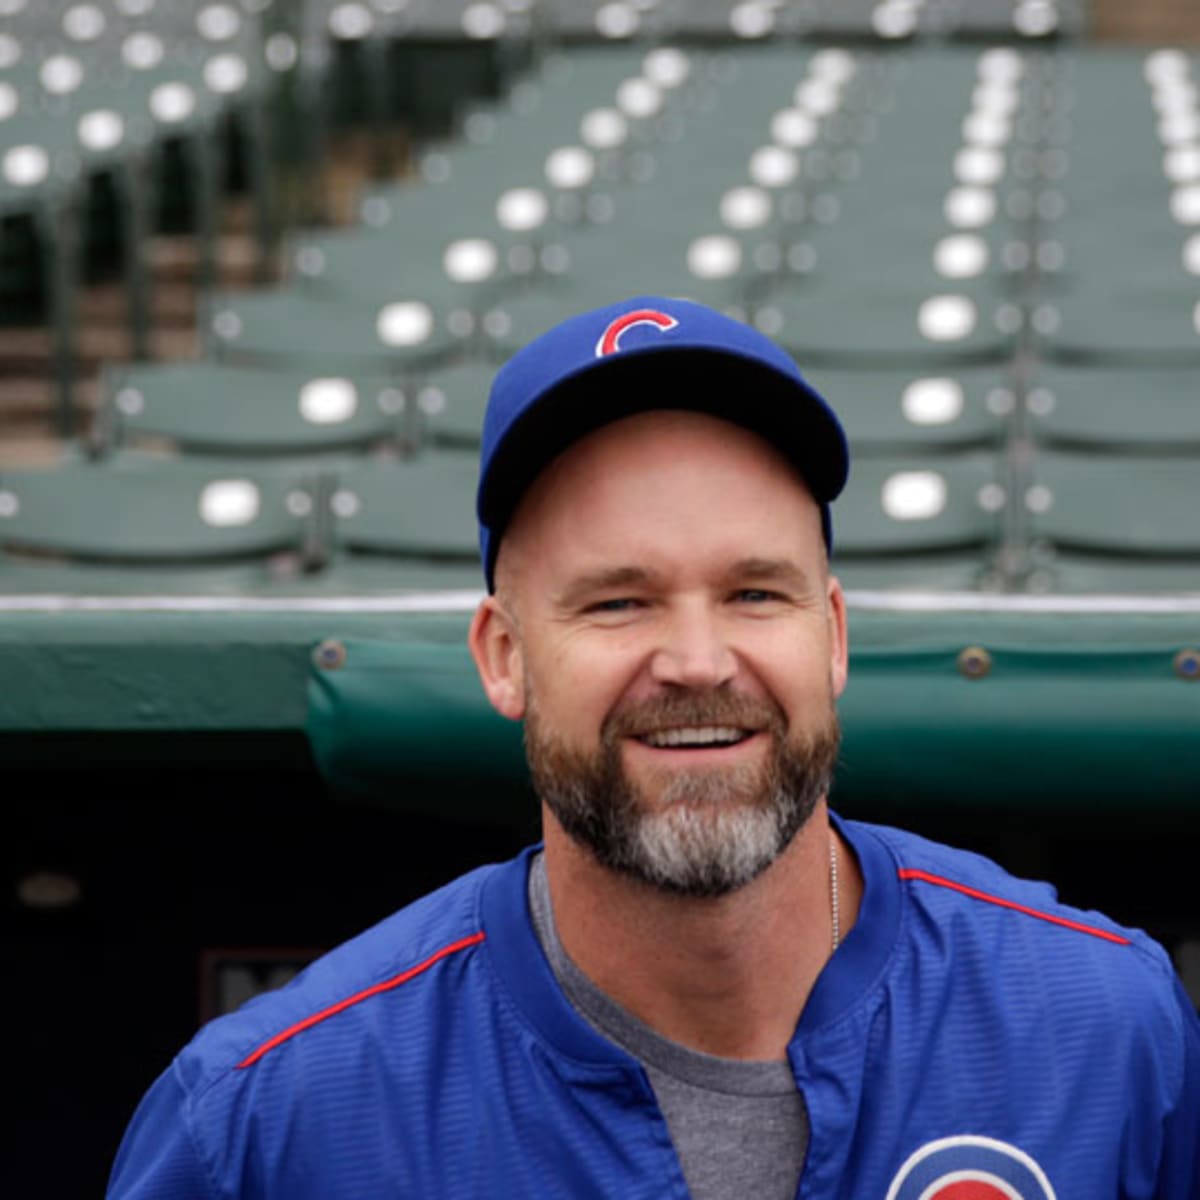 David Ross Doesn't Need a Haircut, Says He Came for Jewelry Even in Short  Season - Cubs Insider